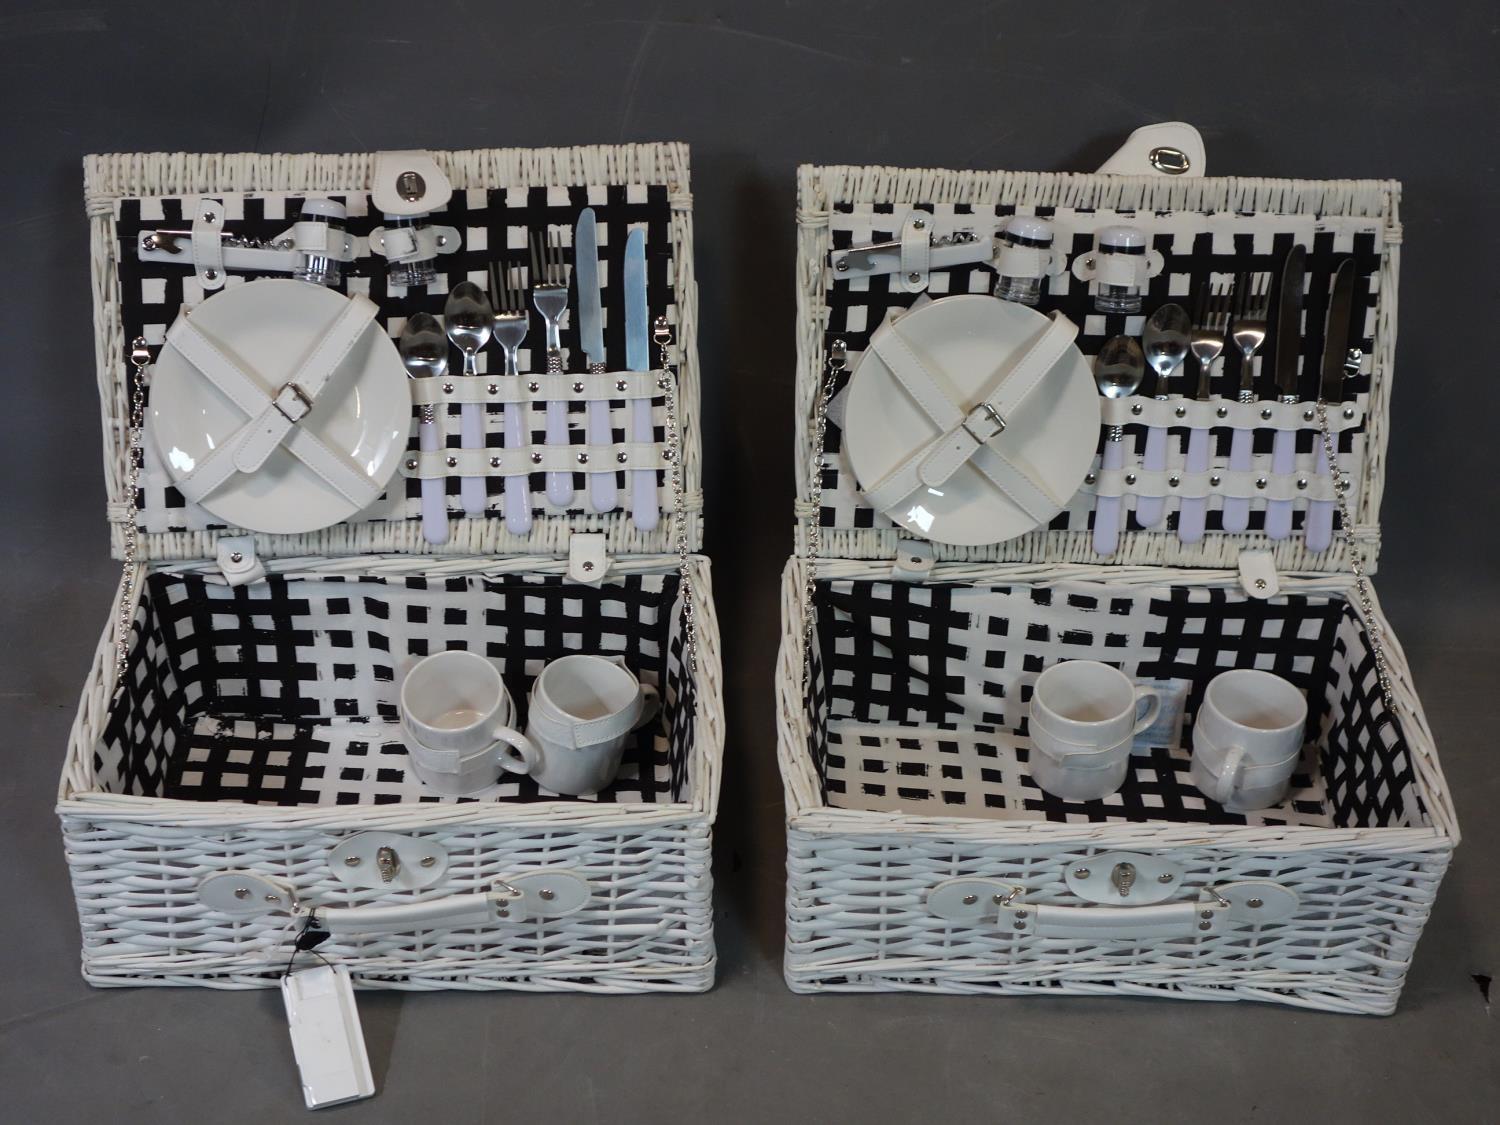 Two wicker picnic baskets, each having 2 cups, 2 side plates, 2 knives, 2 forks, 2 spoons, corkscrew